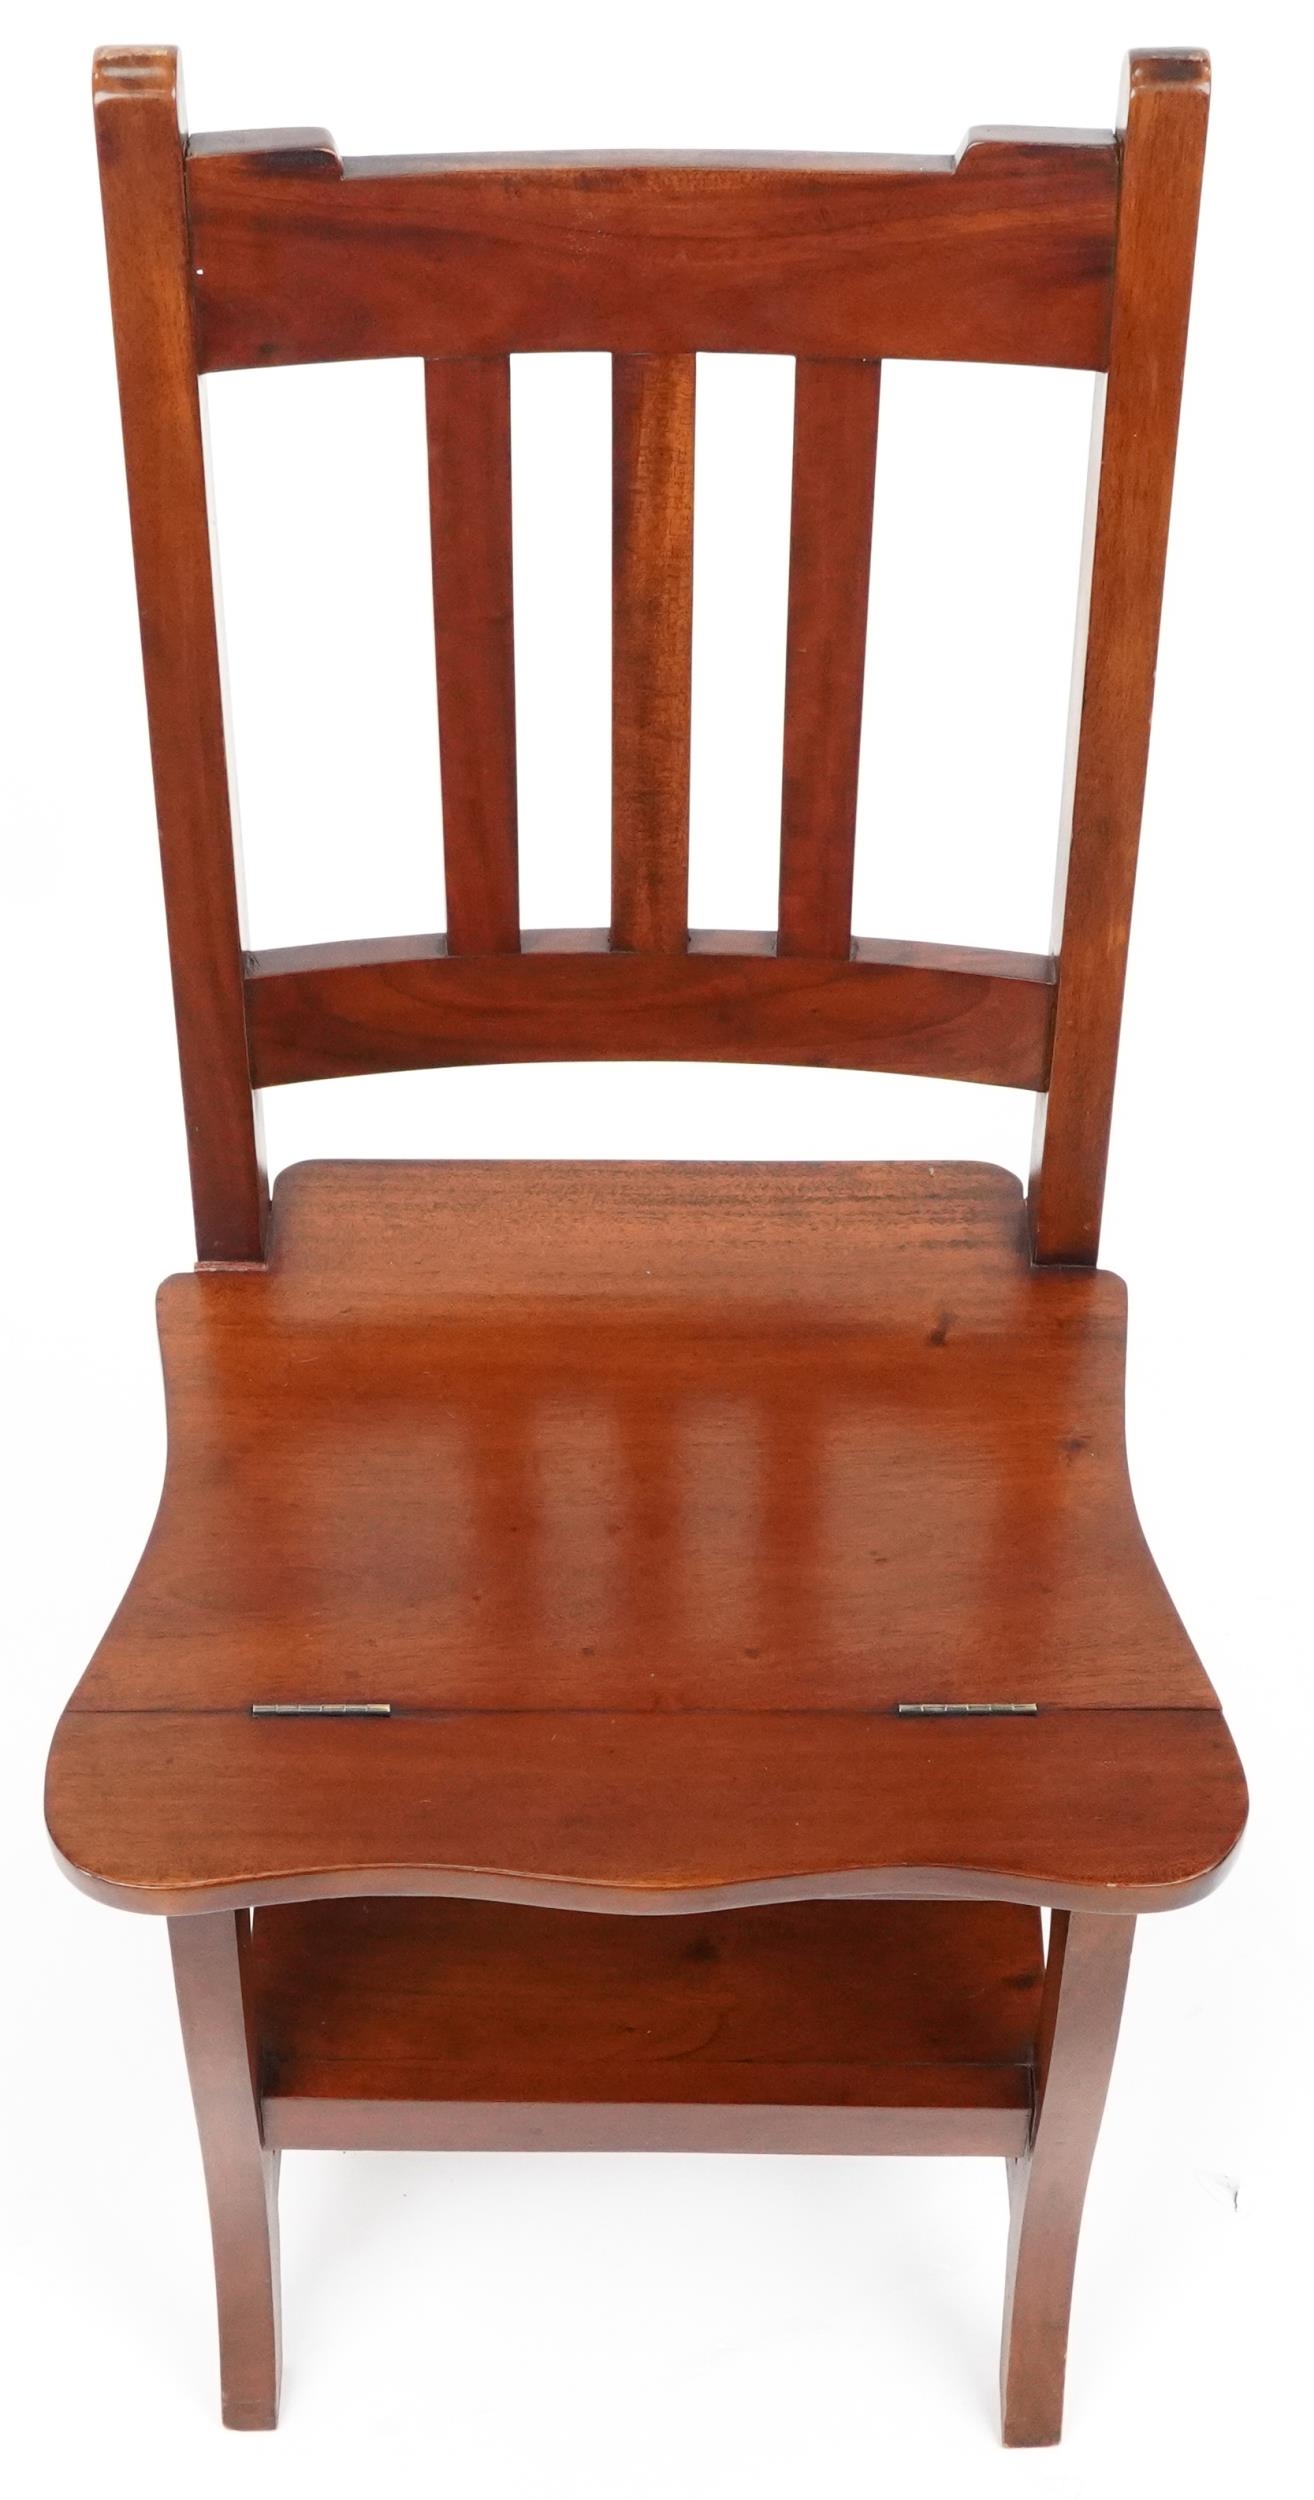 Set of metamorphic hardwood library steps/chair, 91.5cm high when as chair - Image 6 of 7